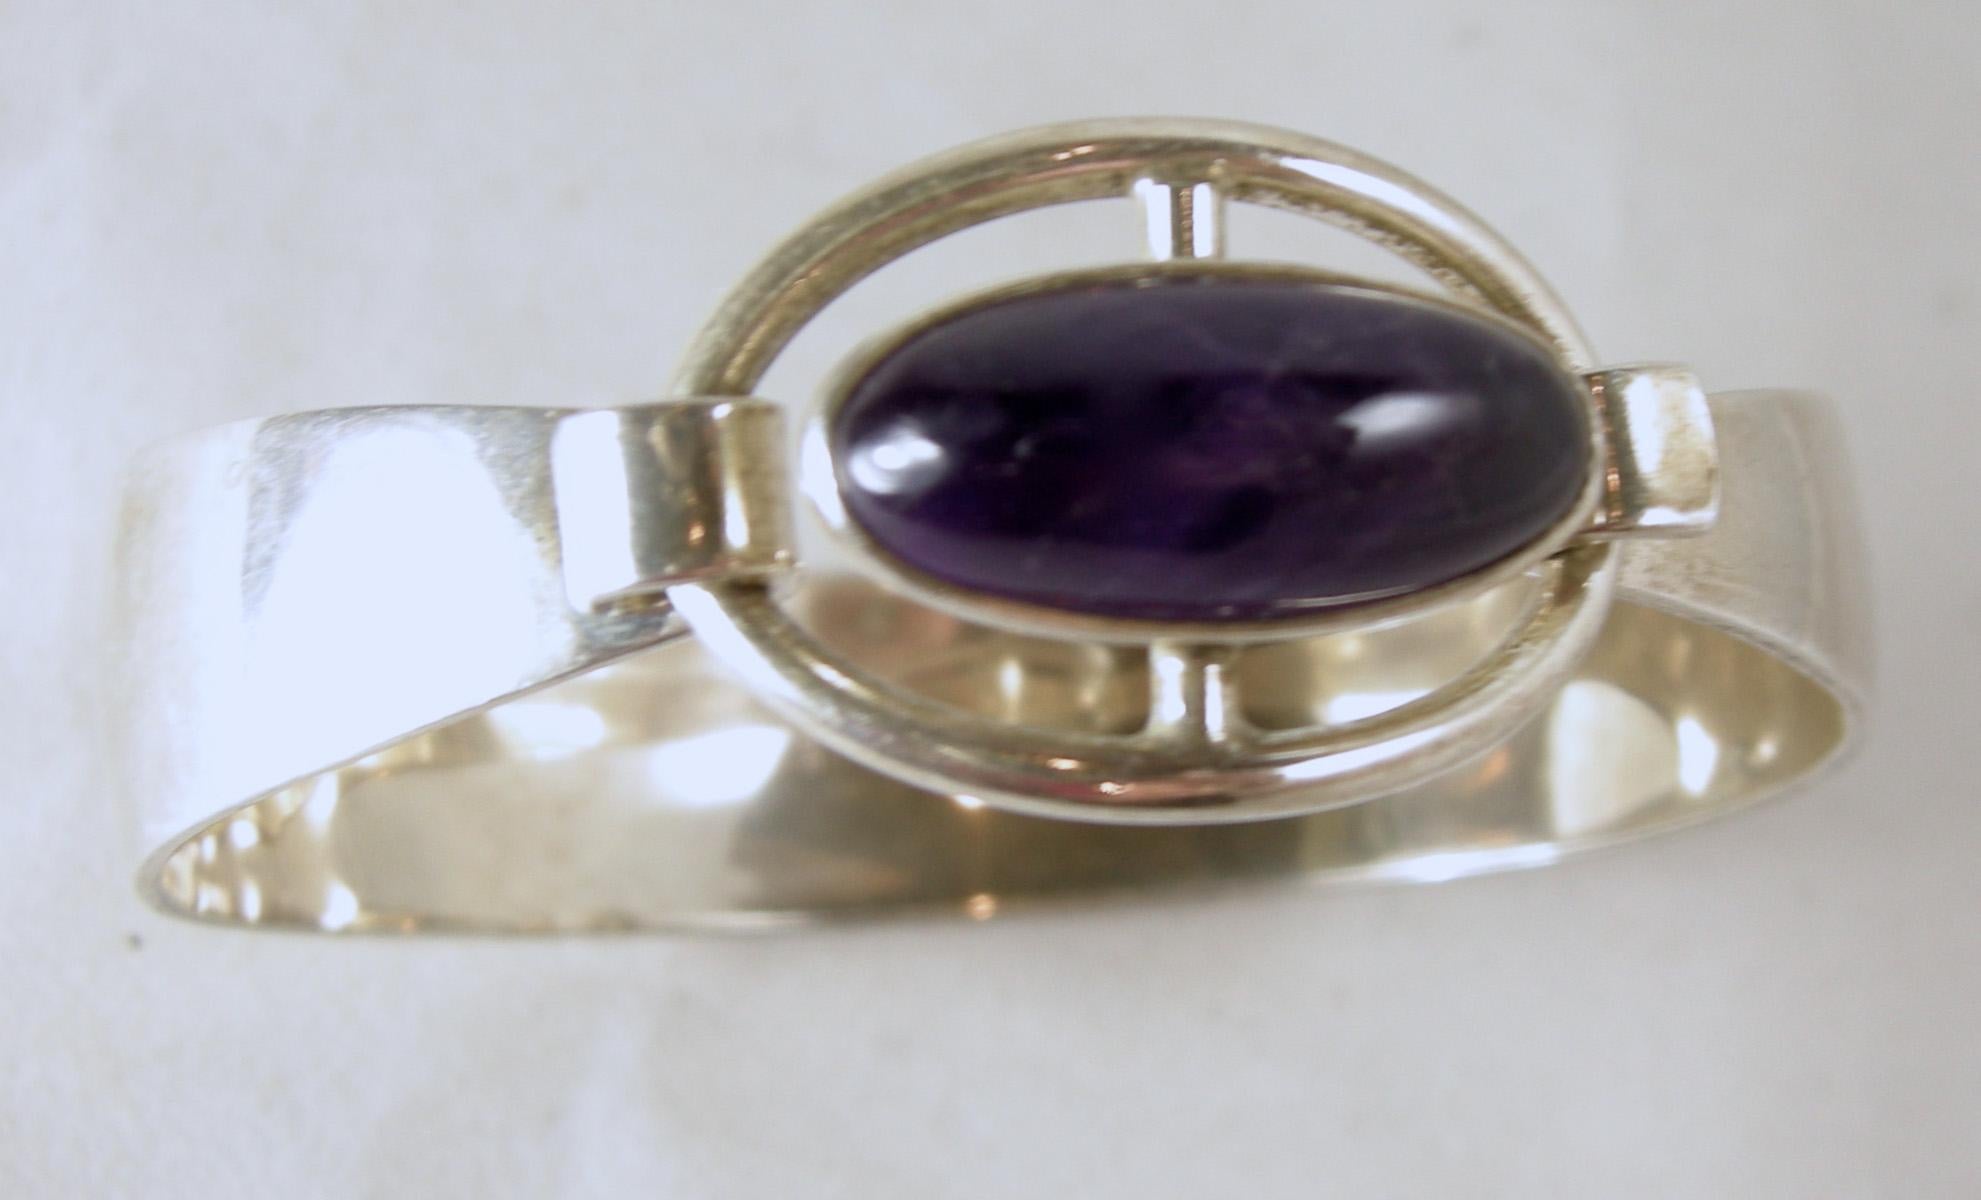 This is a sterling silver bracelet with an oval amethyst center.  I never tested the stone, so I don’t know if it’s real.  It has a front latch to open.  It measures 6-1/2” x 5/8” wide at its widest point.  It is marked “sterling Silver 925 Denmark”